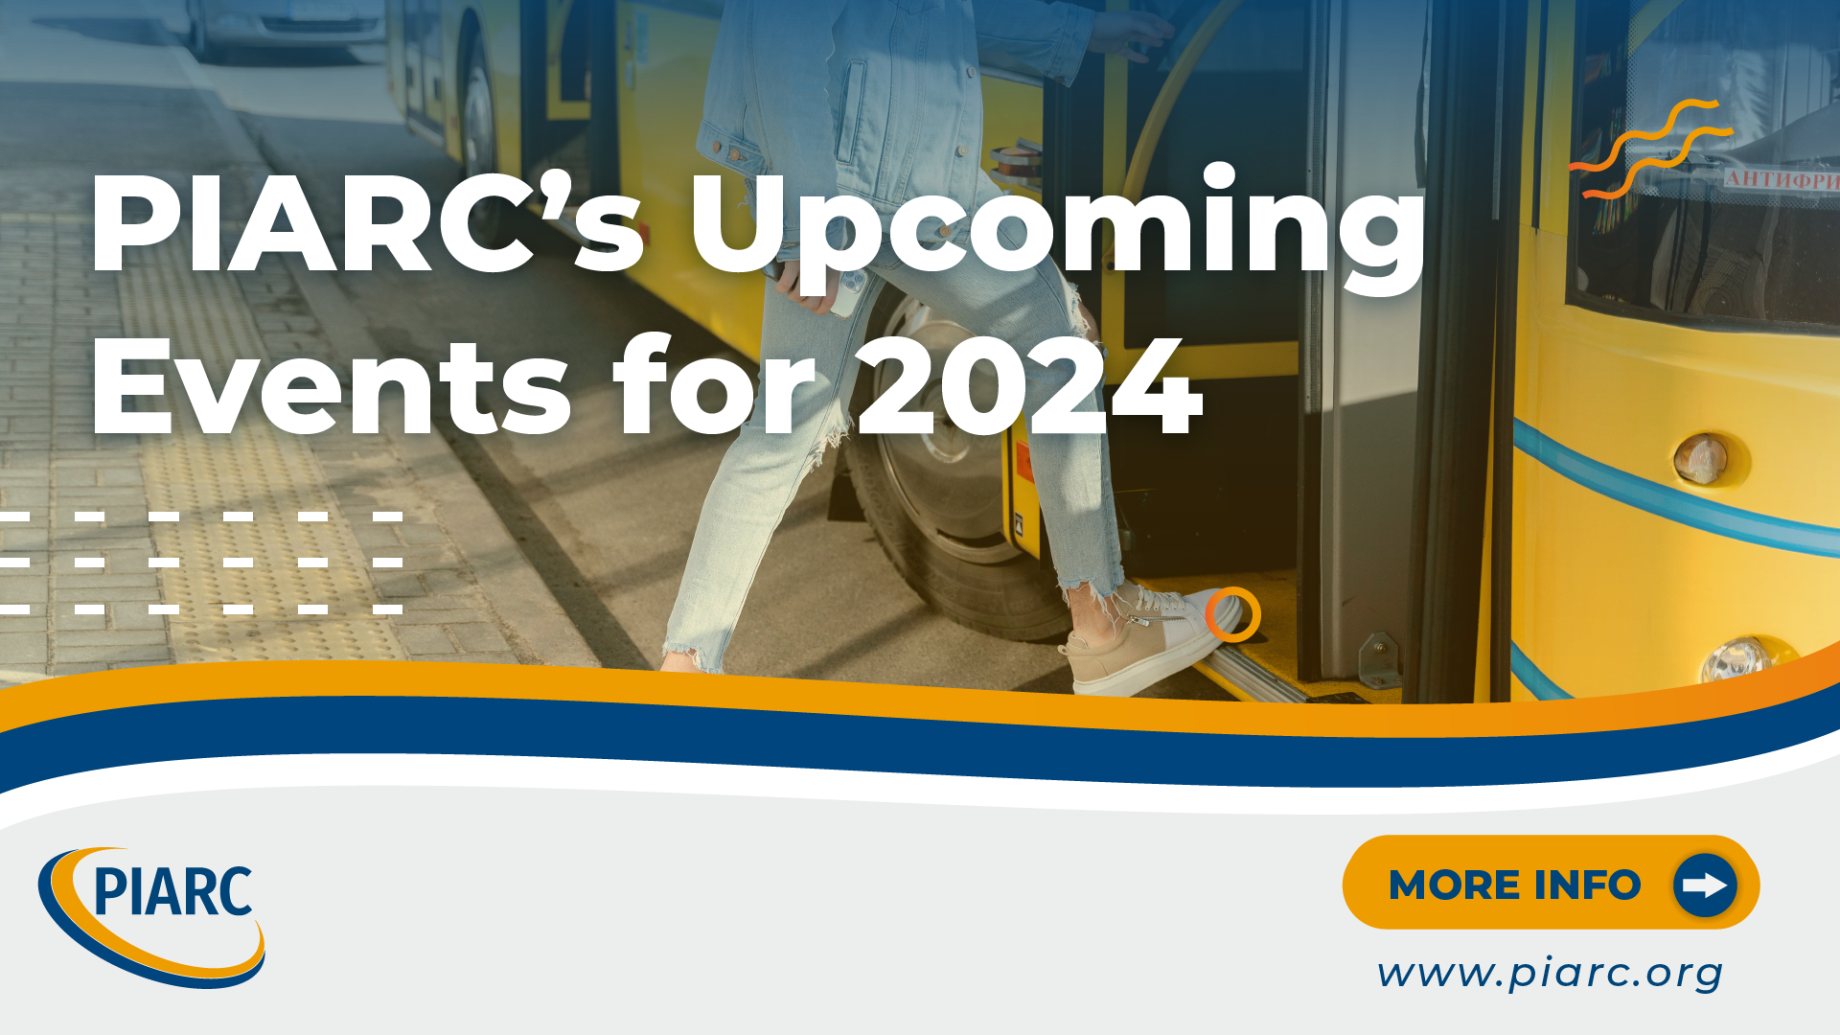 Don't miss out: PIARC's exciting lineup of events in 2024